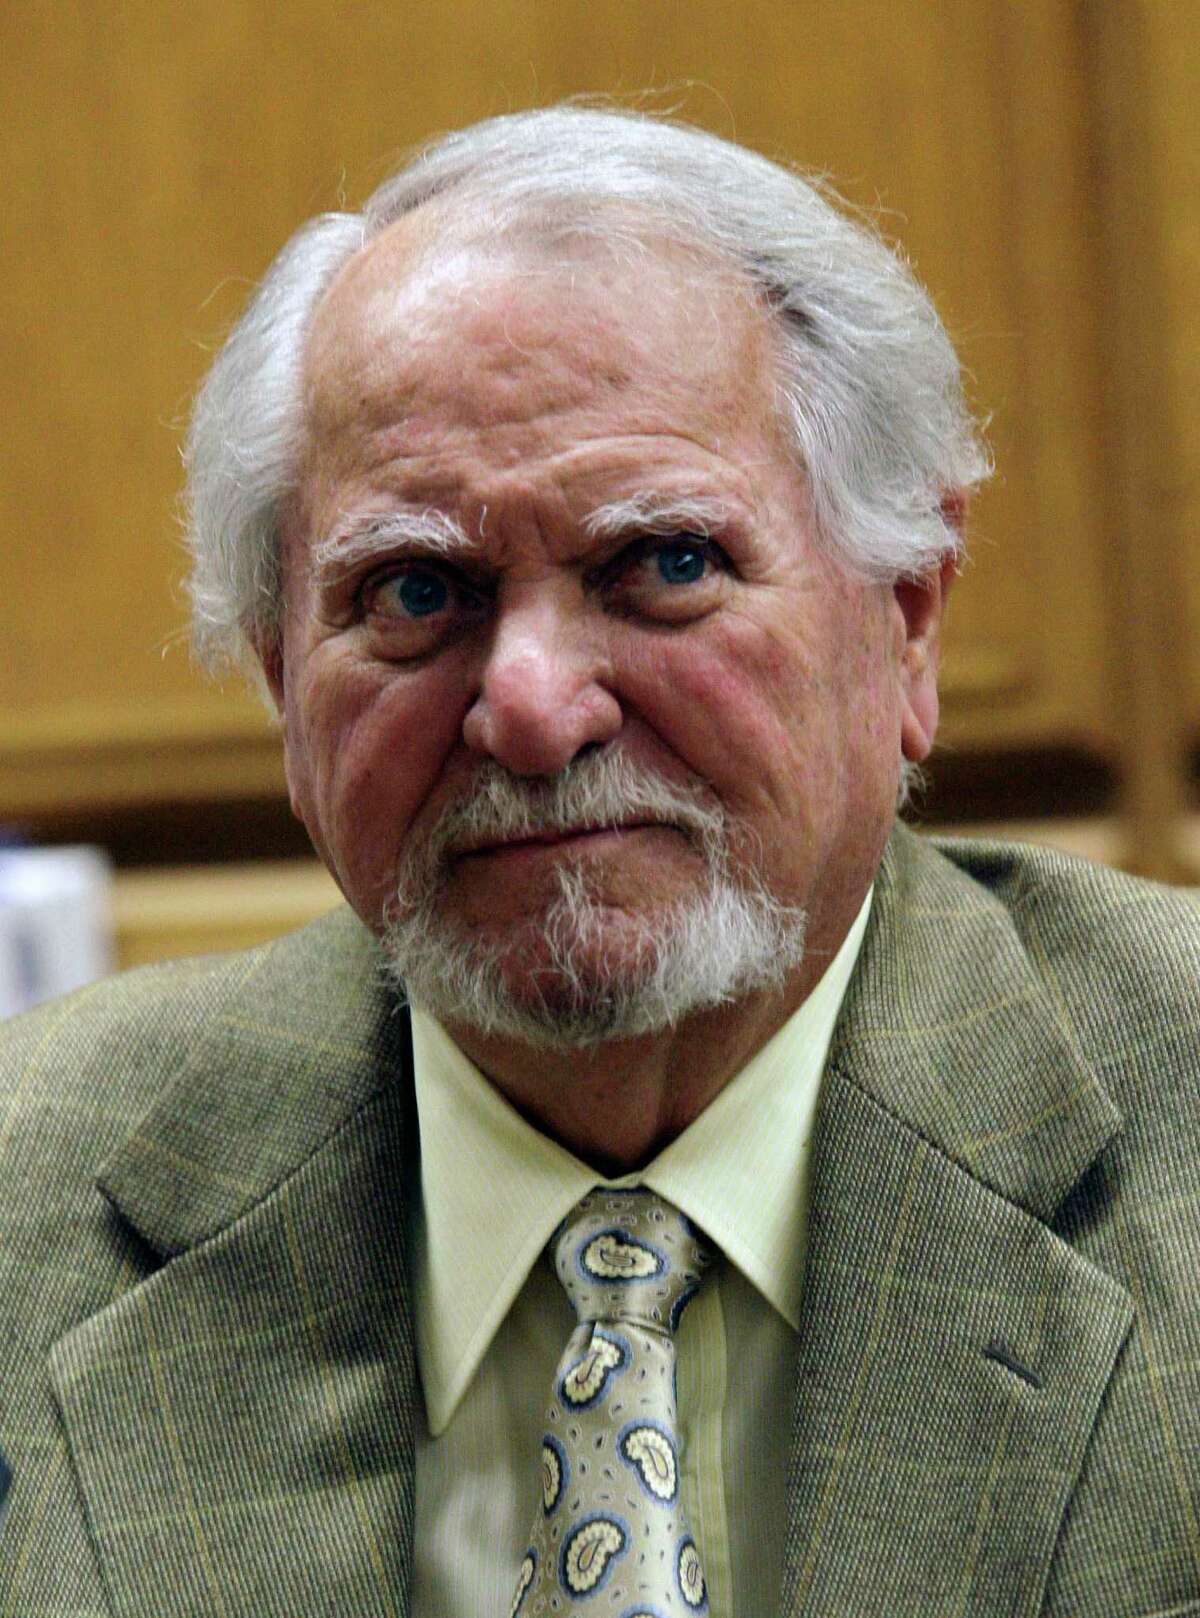 FILE - In this Feb. 13, 2007 file photo, best-selling author Clive Cussler waits to testify in court in a lawsuit over the film, "Sahara," in Los Angeles. (AP Photo/Nick Ut, file)